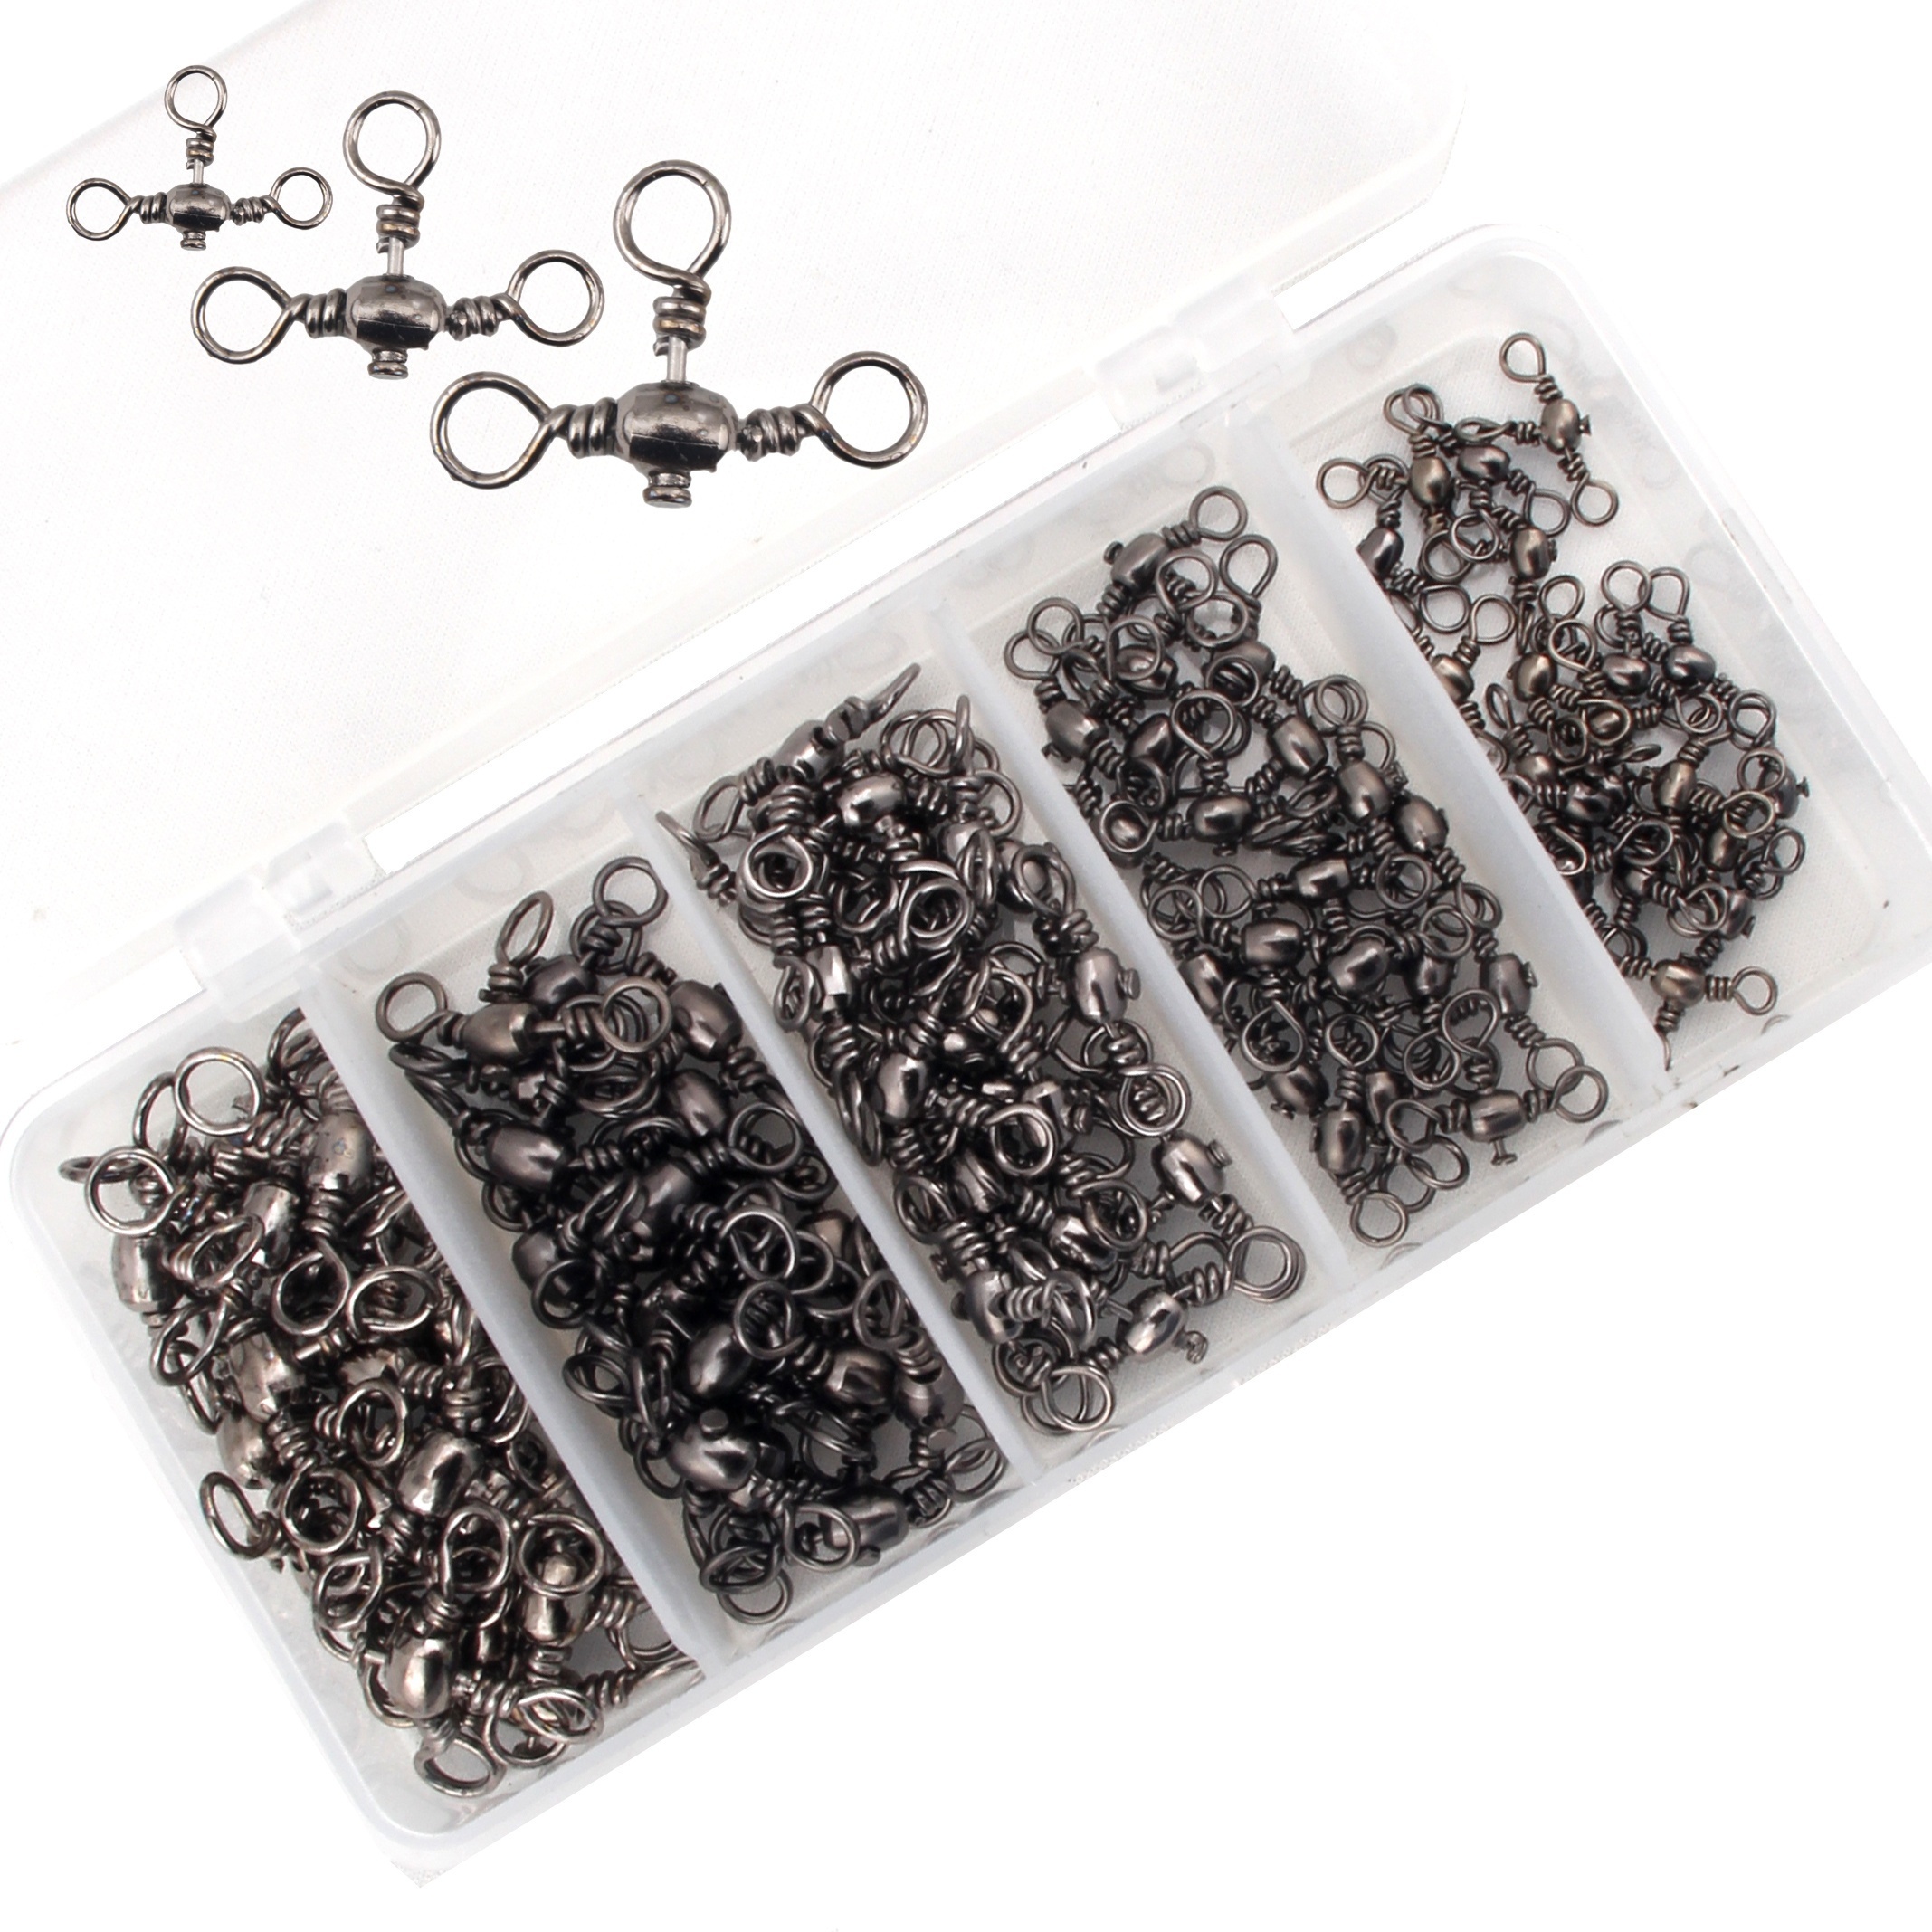 10lb- Fishing Swivels, Stainless Steel Material Ball Bearing